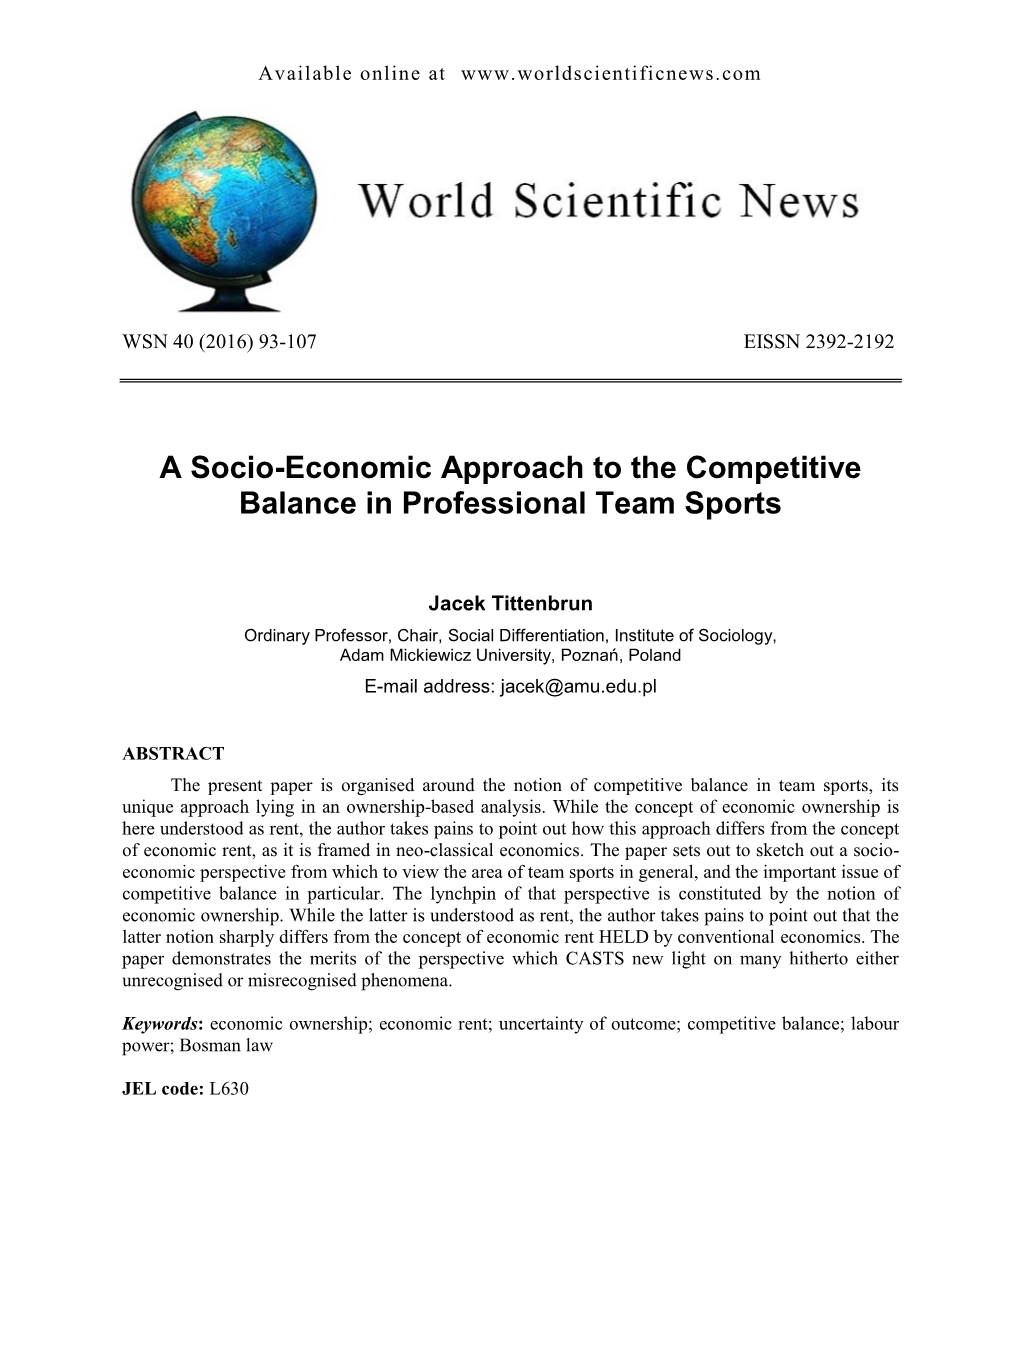 A Socio-Economic Approach to the Competitive Balance in Professional Team Sports